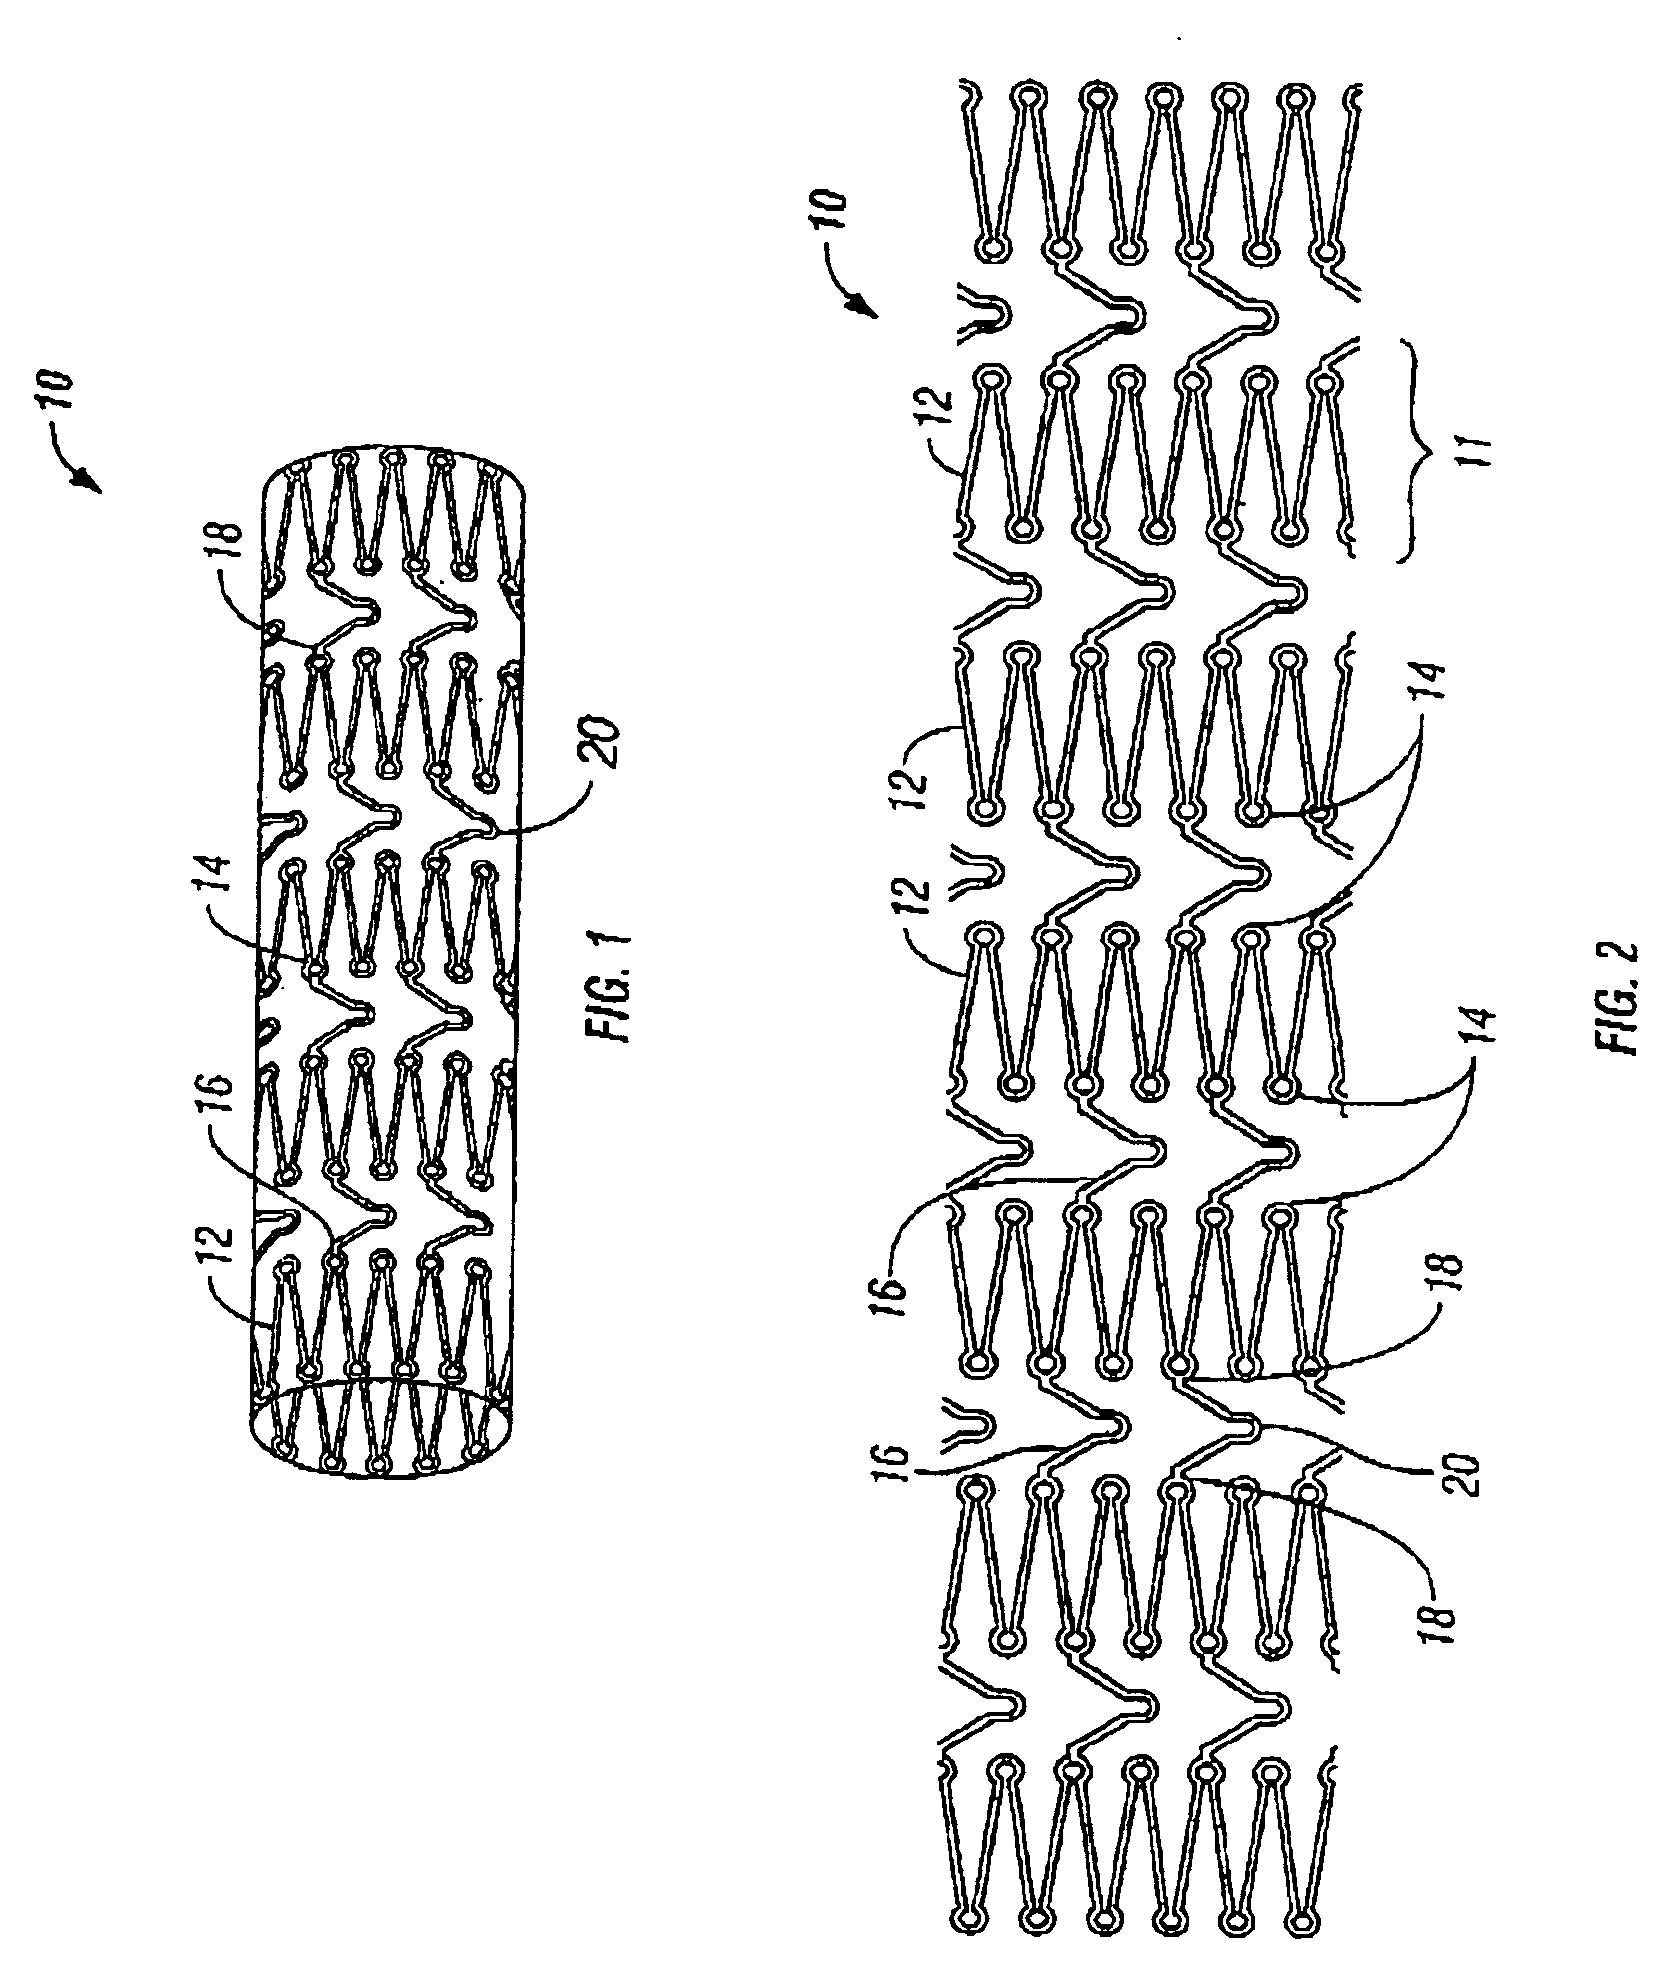 Implantable expandable medical devices having regions of differential mechanical properties and methods of making same